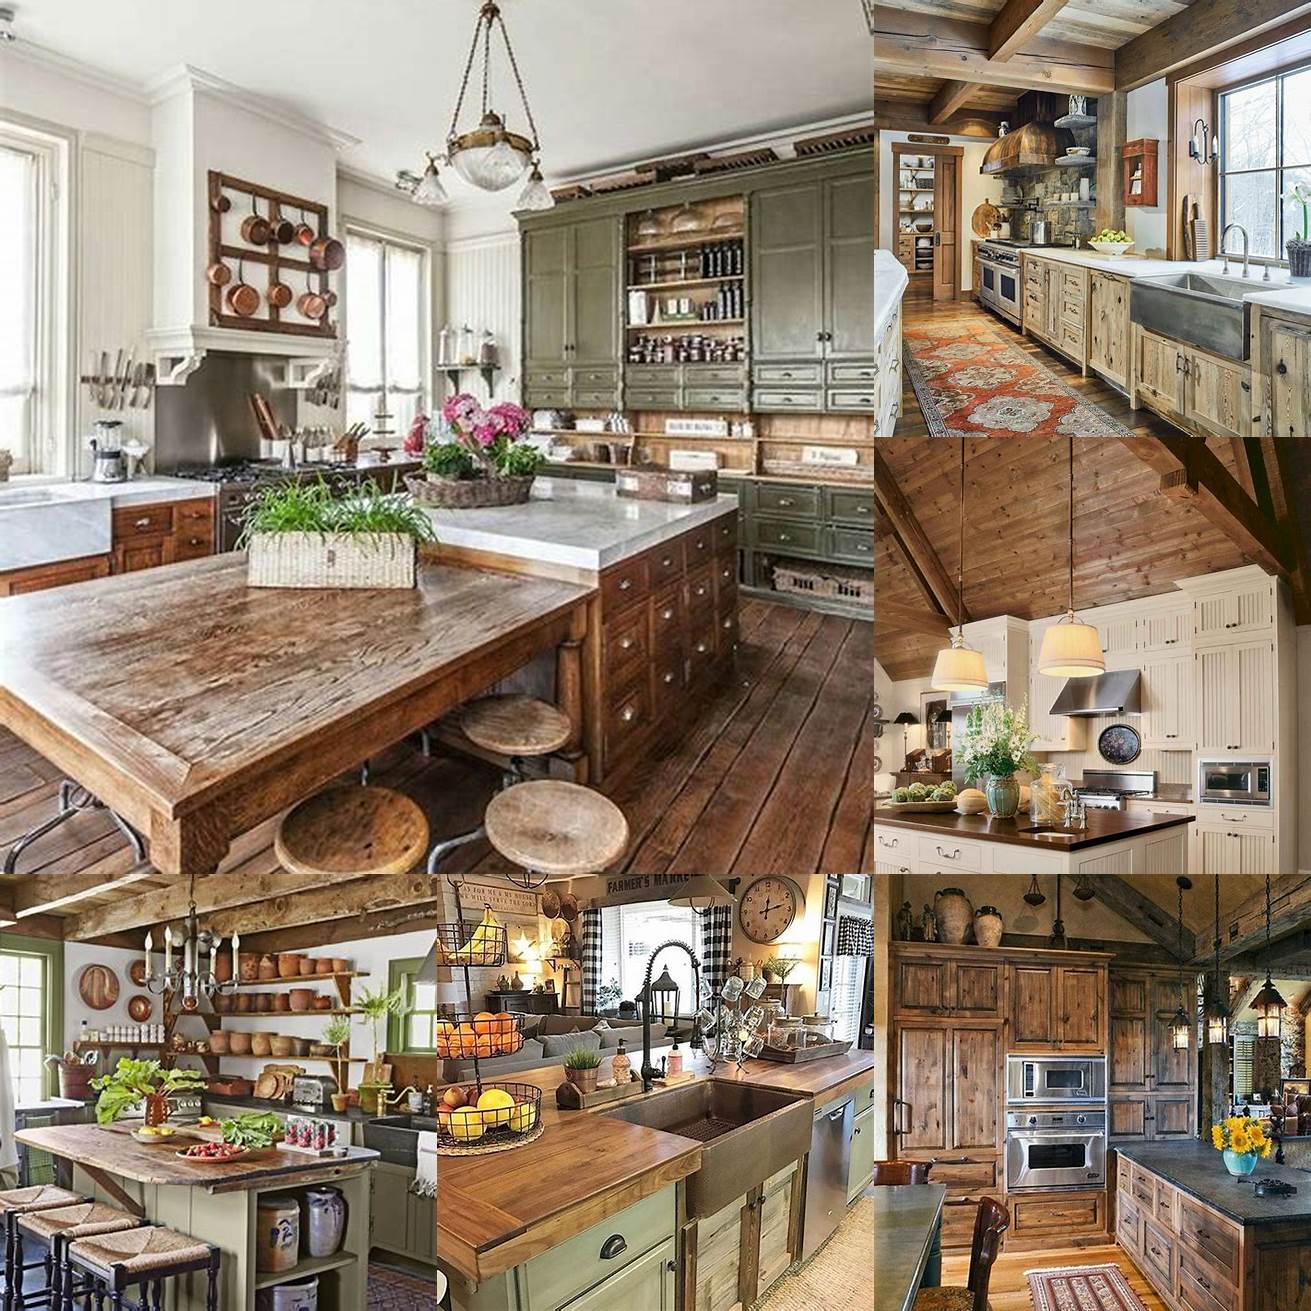 1 Rustic Chic - A charming country kitchen with white cabinets wooden countertops and a vintage-inspired range The exposed brick wall and wooden ceiling beams add warmth and texture